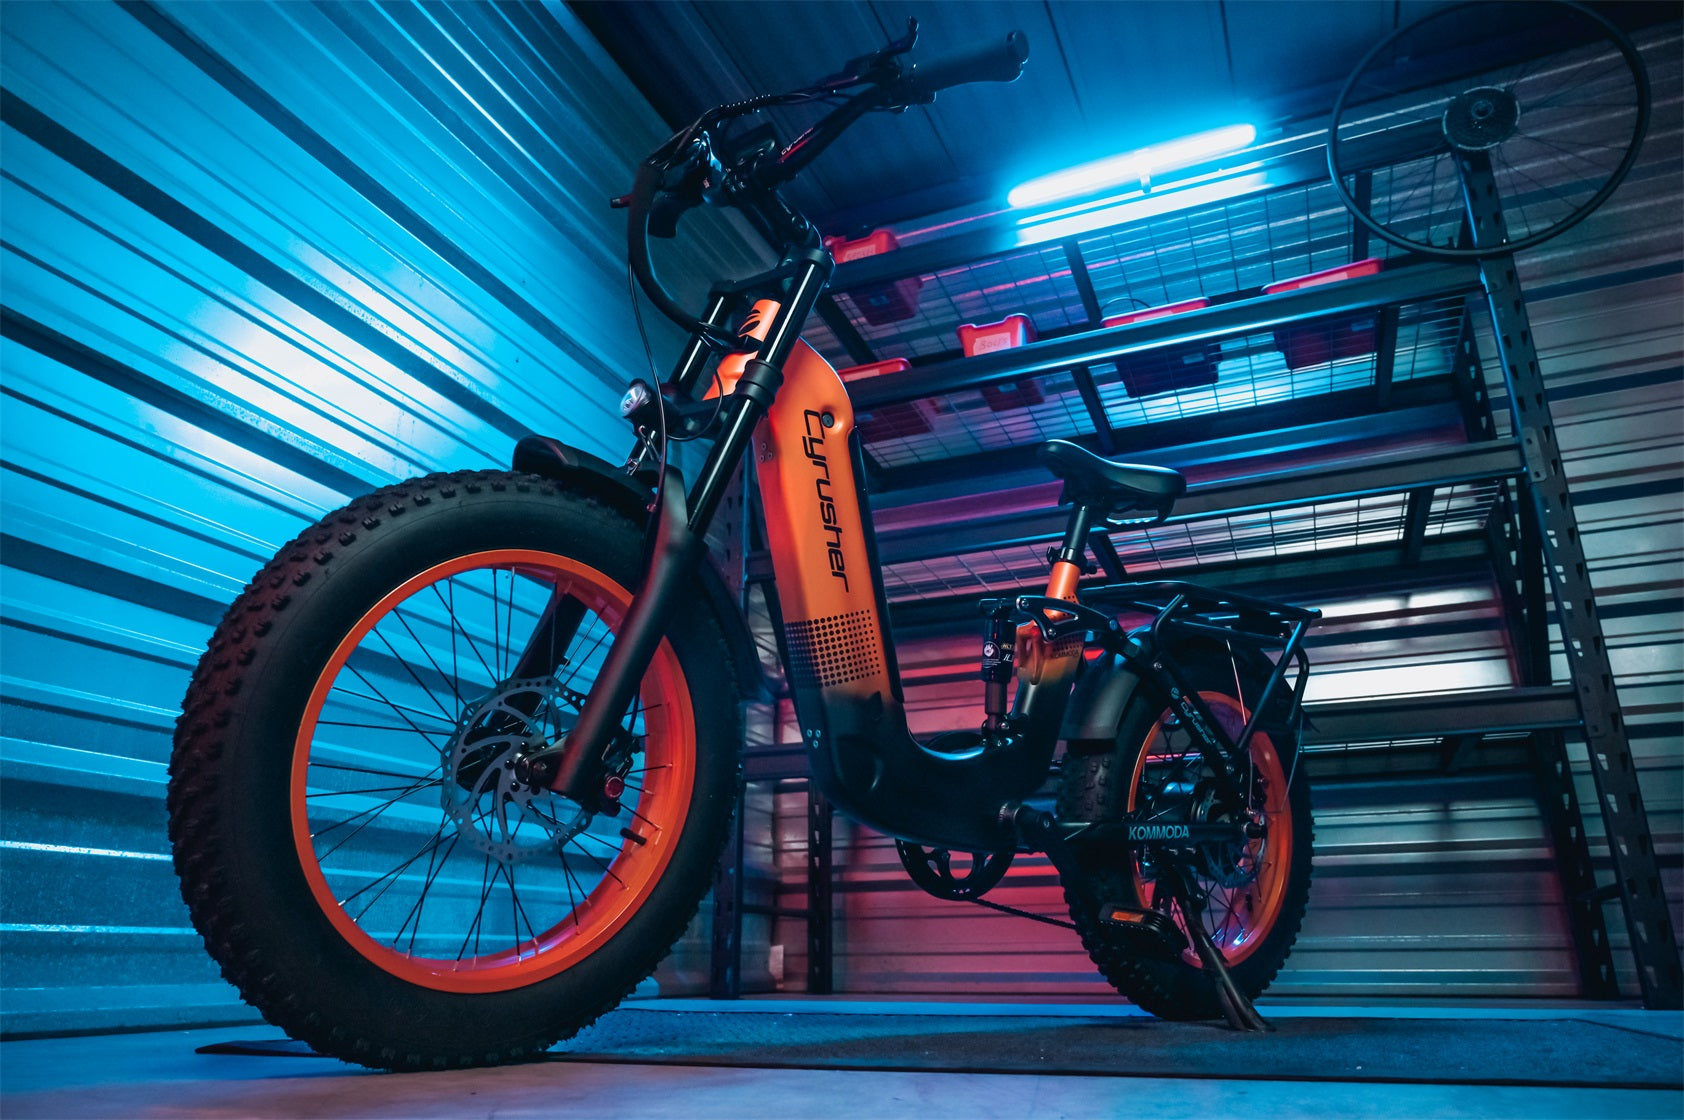 Cyrusher Kommoda -- the First Newly Designed Step-Through Ebike for 2022, Breaking the Mold of Previous Designs